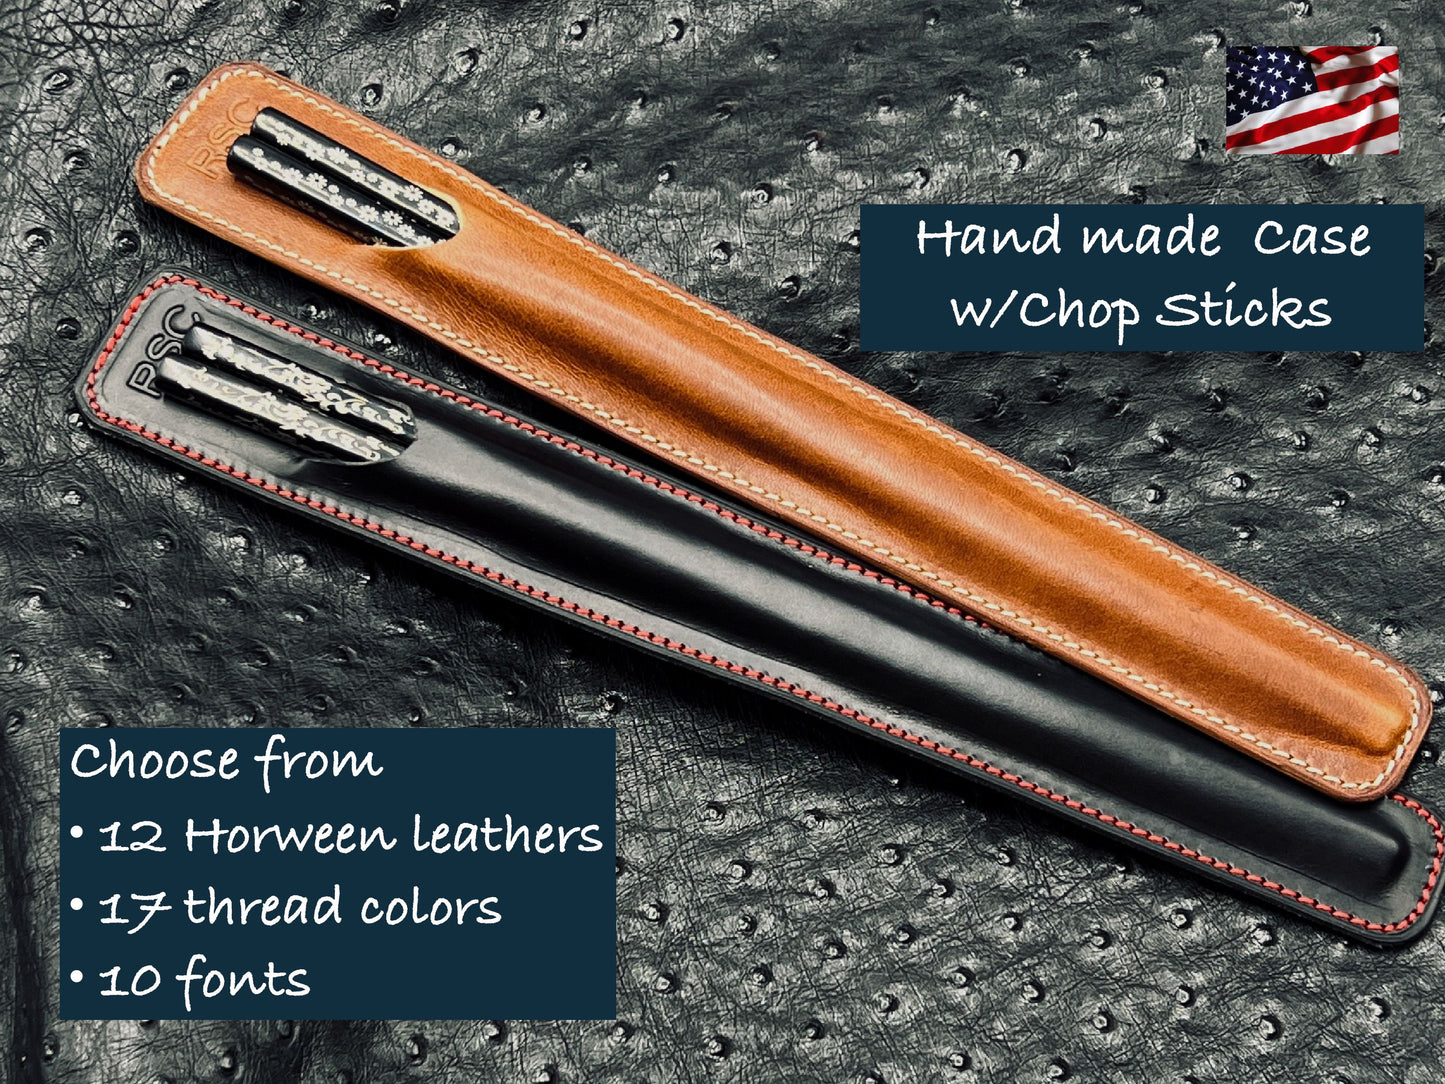 Custom Chopsticks Case in Horween Leathers with Stainliness Steel Chopsticks | handmade by Custom Leather and Pen